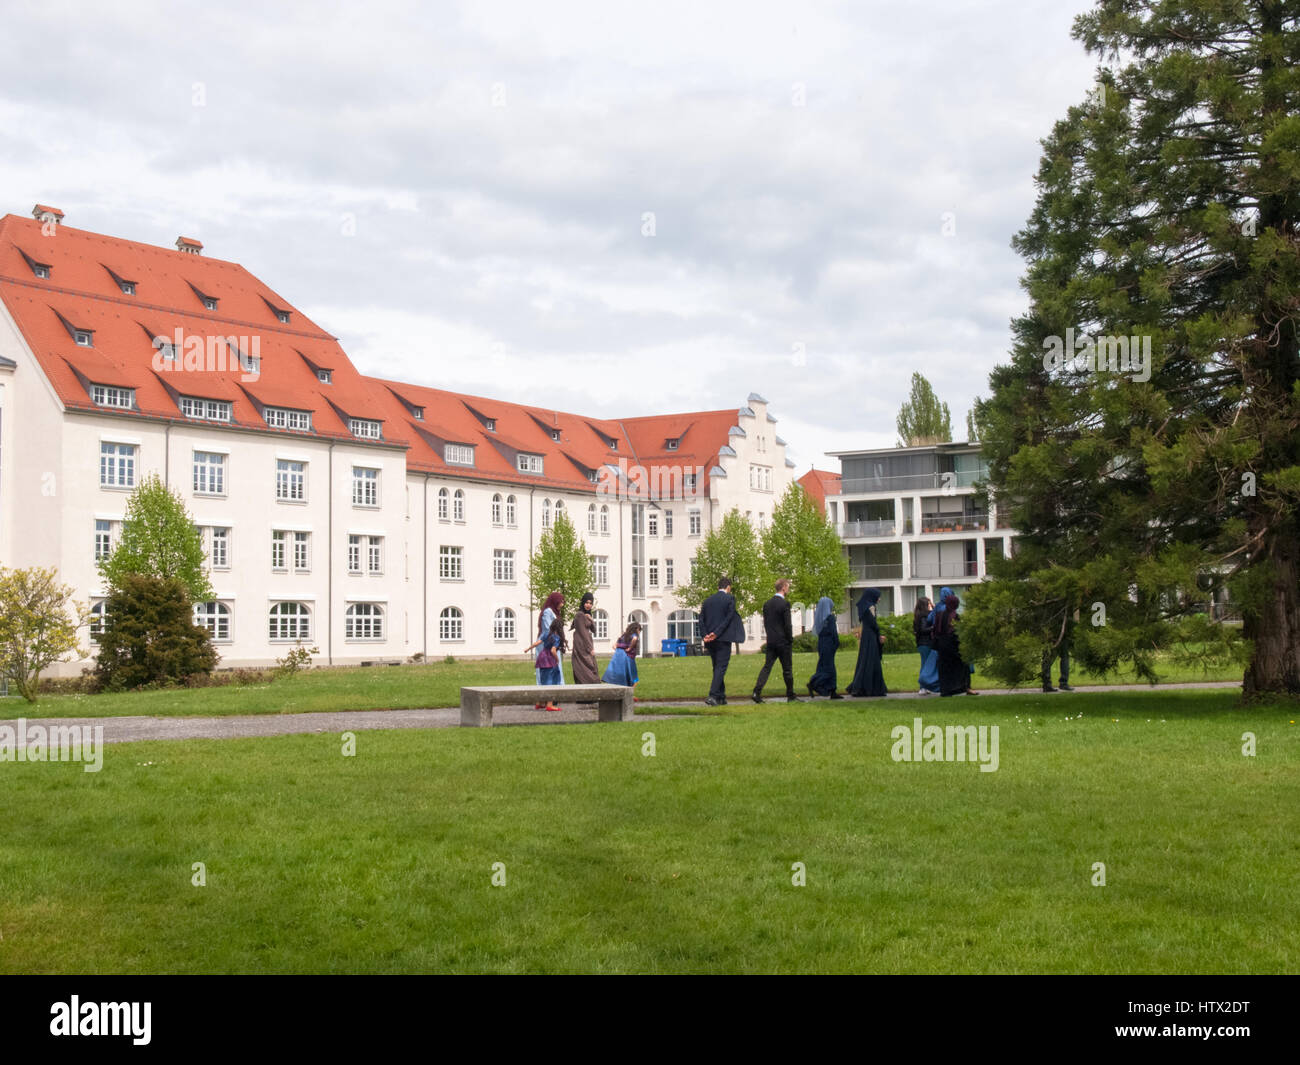 Lindau, Germany - May 2, 2015: Participants in a Turkish wedding as they walk in the park of Lindau. The photographer takes pictures to remember the e Stock Photo